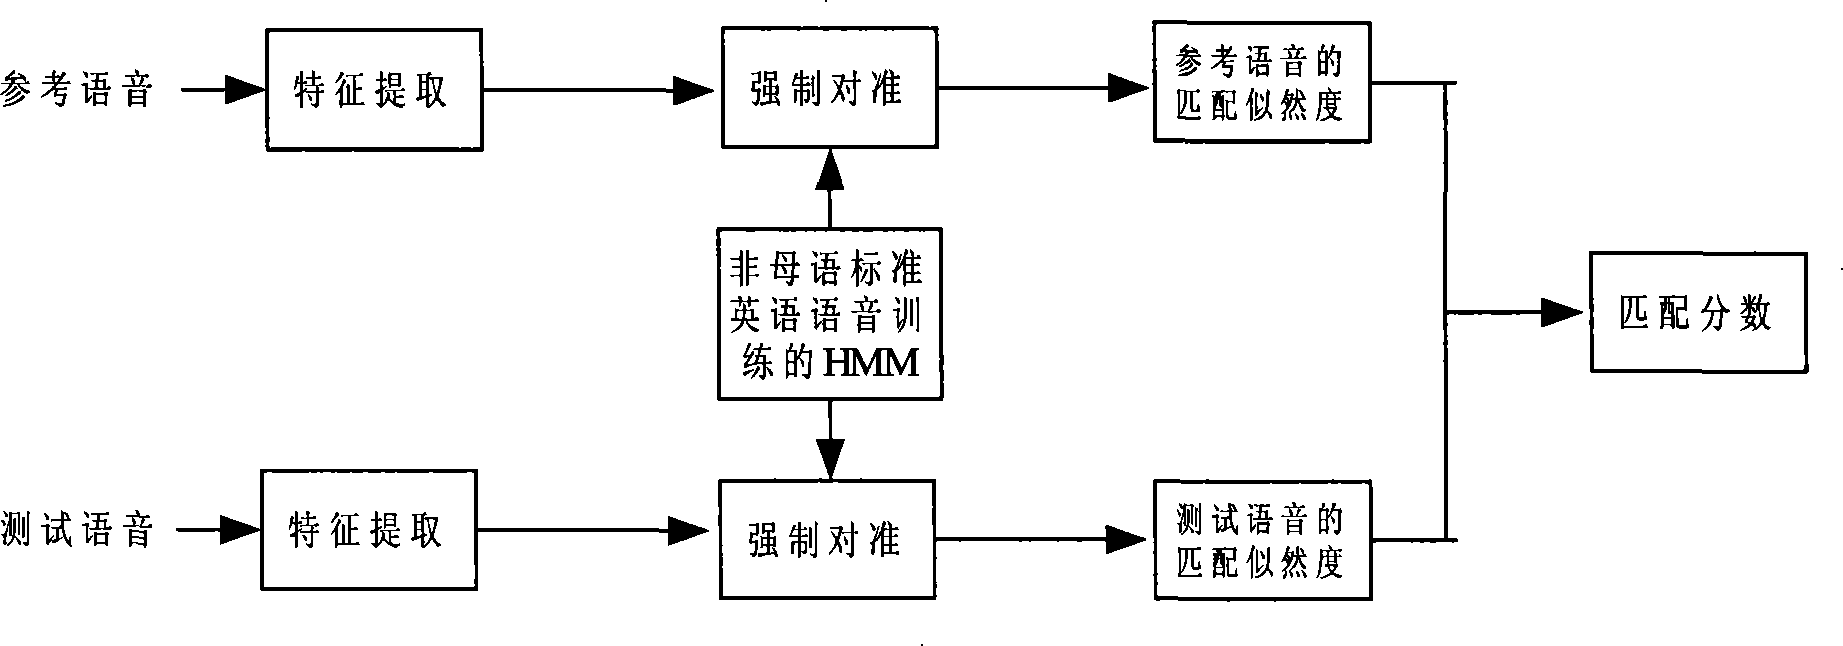 Pronunciation quality evaluation method of computer auxiliary language learning system